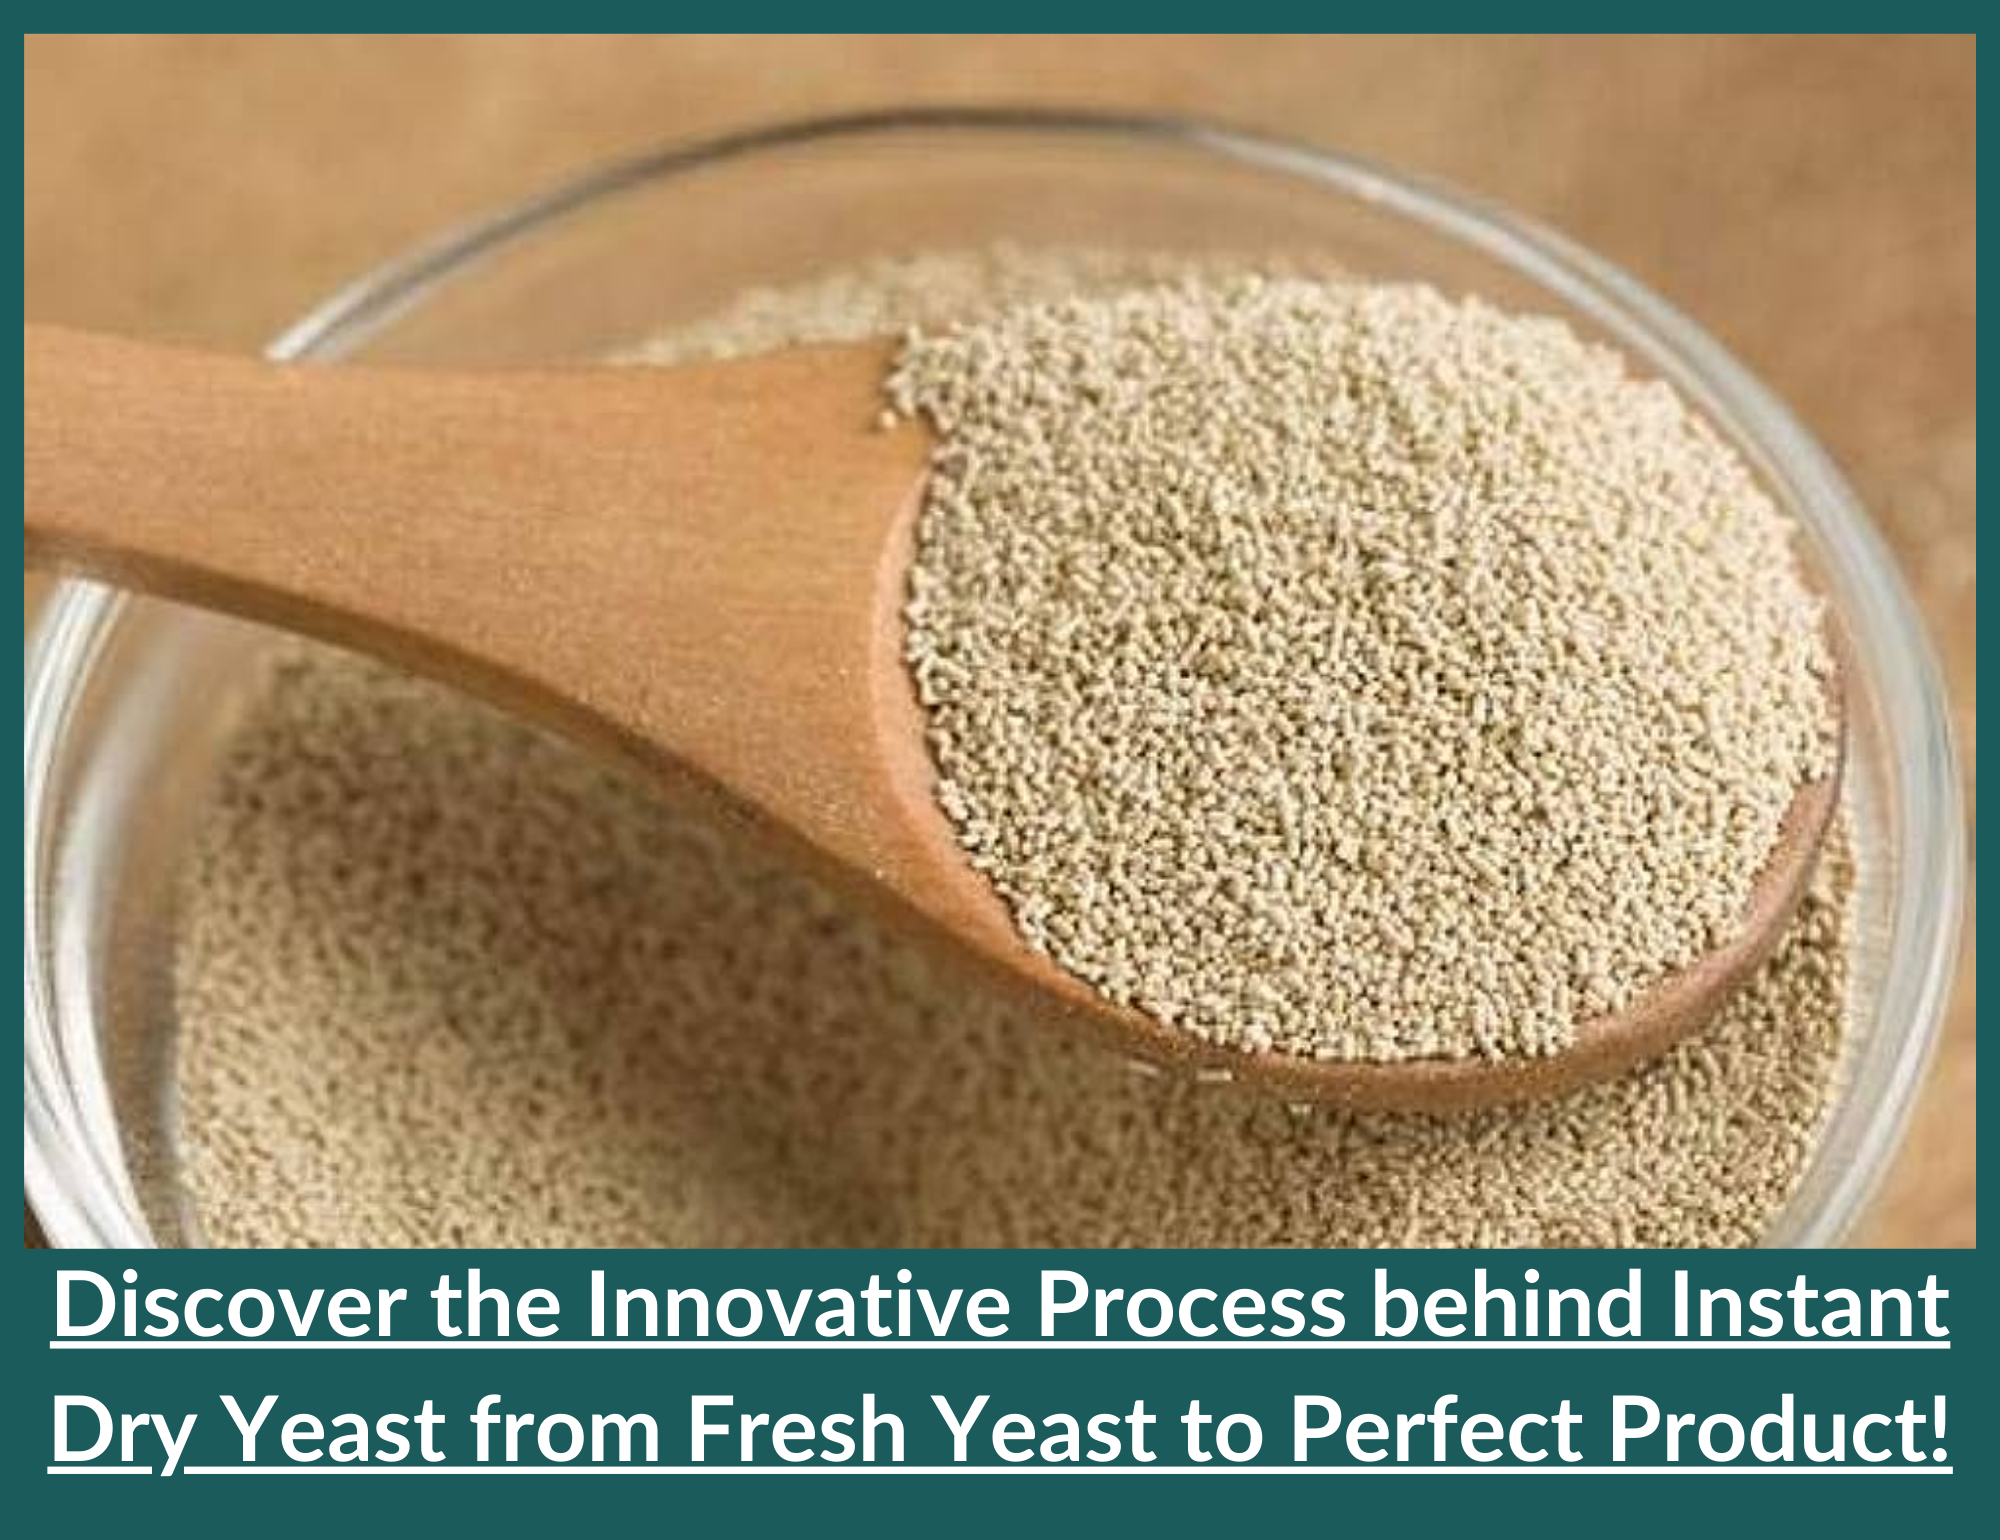 Instant Dry Yeast production